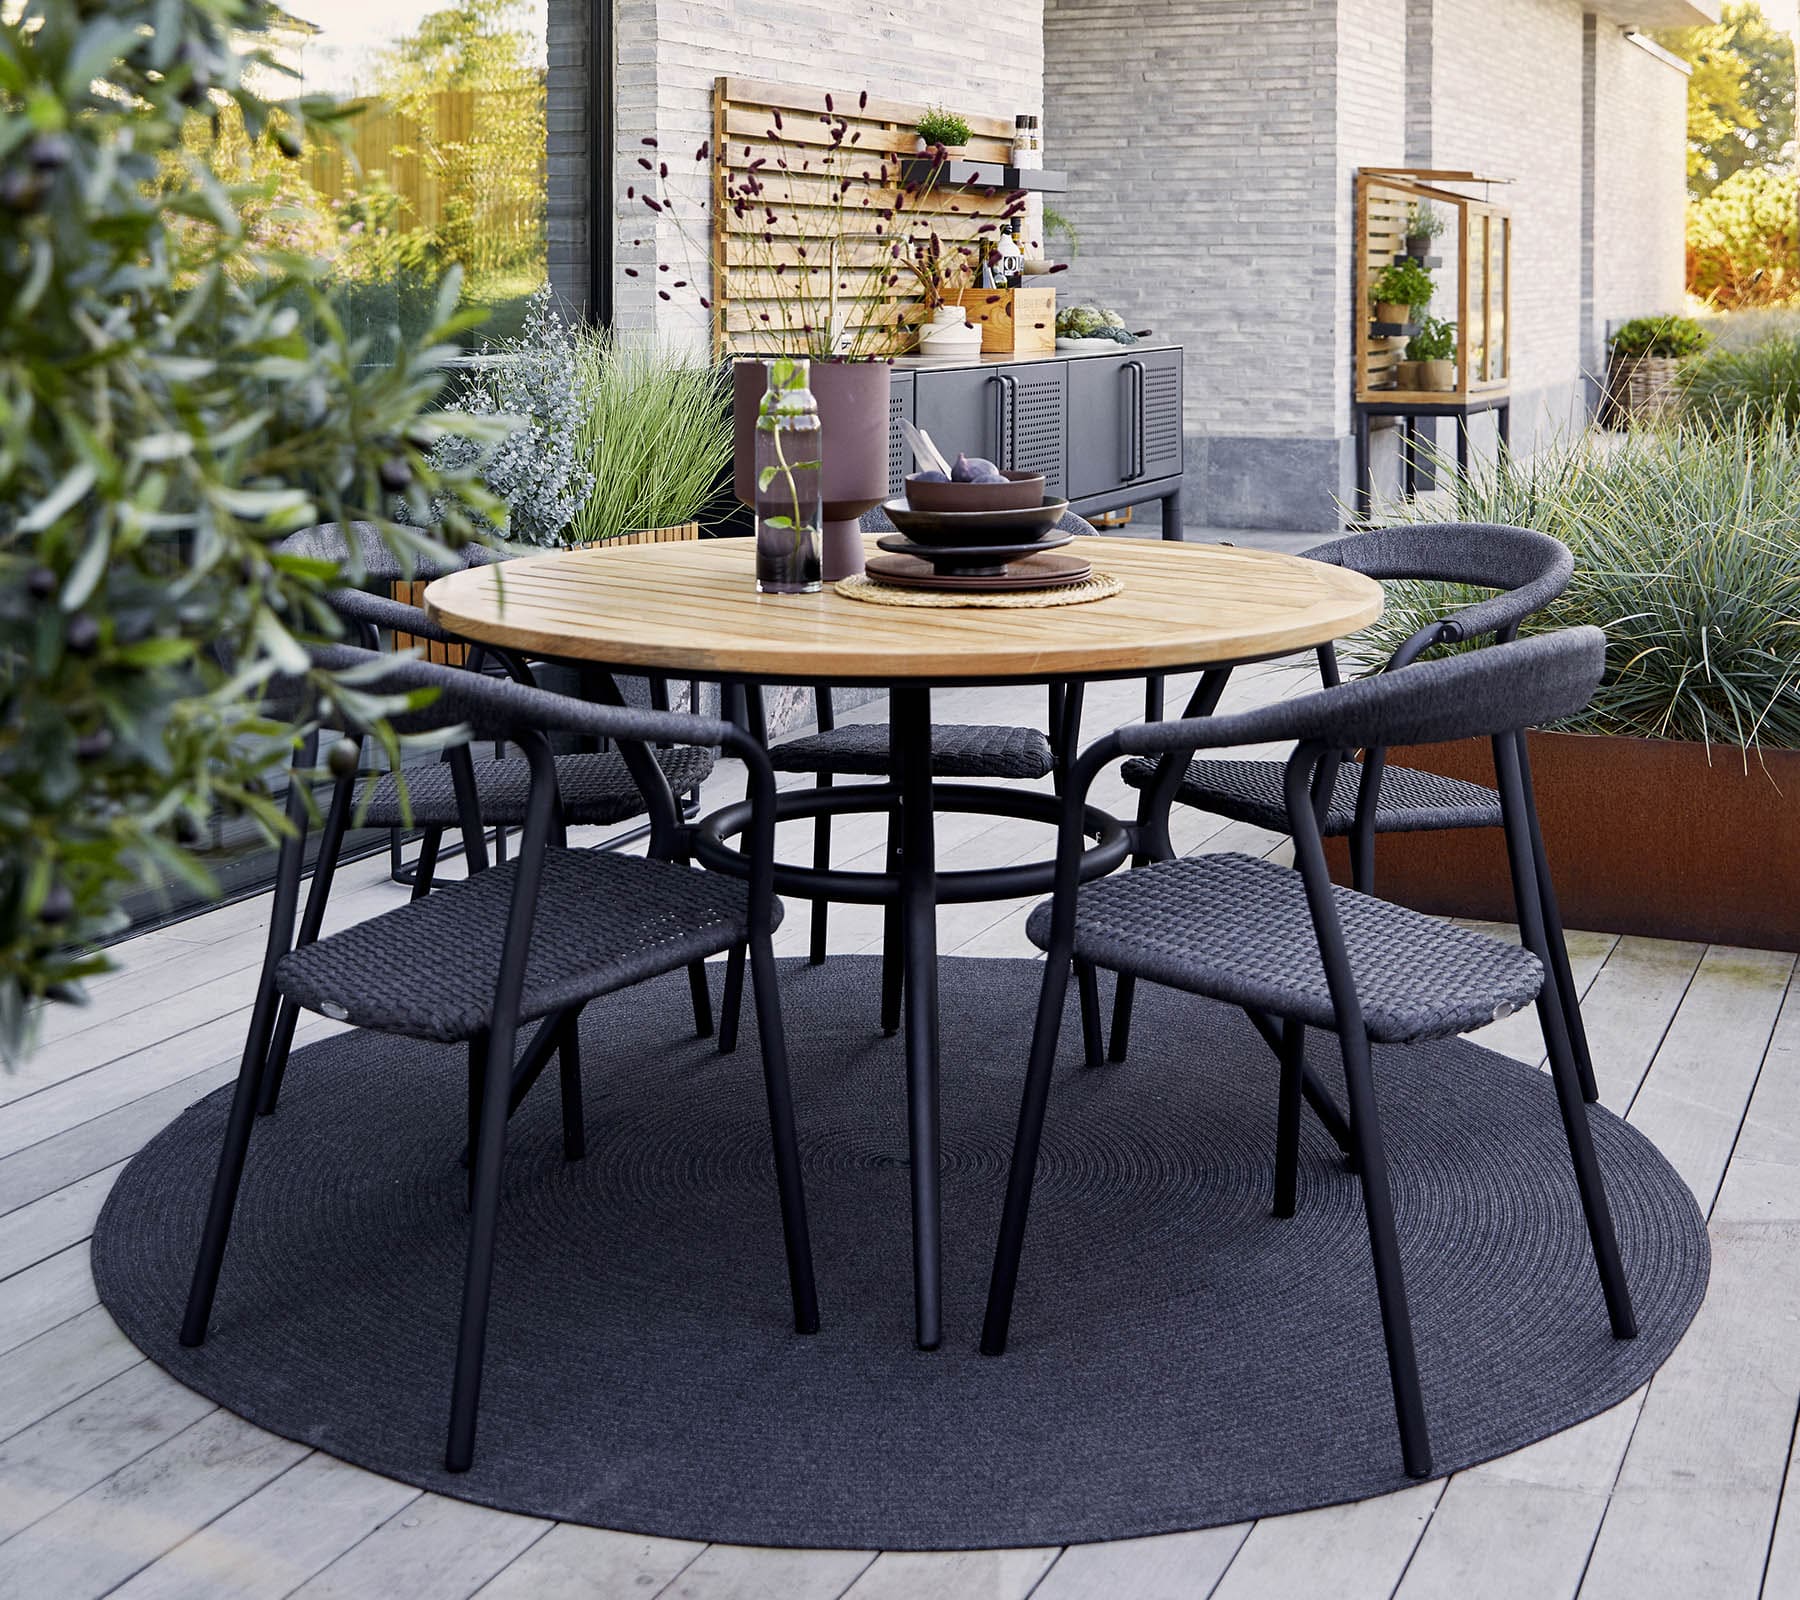 Boxhill's Noble Outdoor Dining Armchair lifestyle image with teak round table at patio